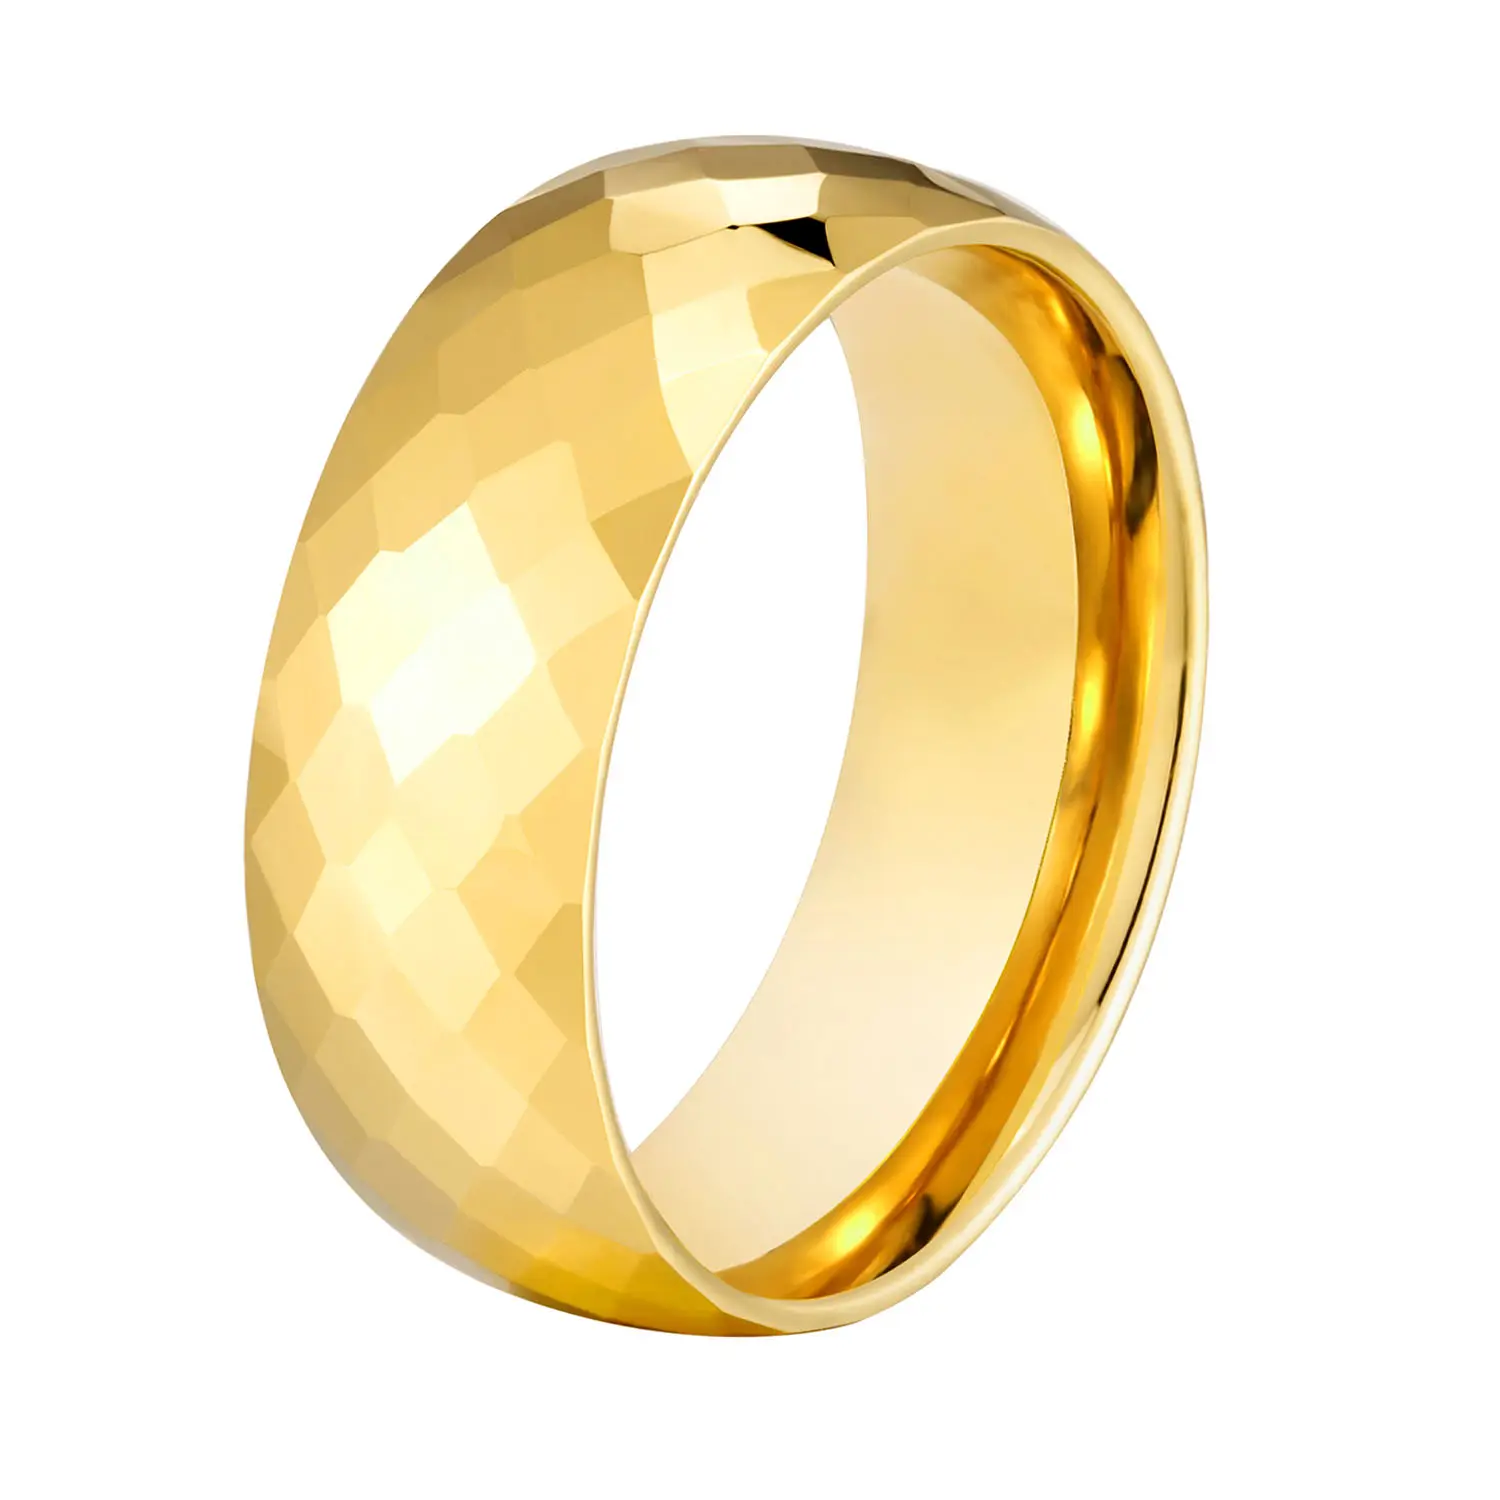 Fashion jewelry 8mm Hammered surface 24K gold plated tungsten carbide ring wedding rings for men gold